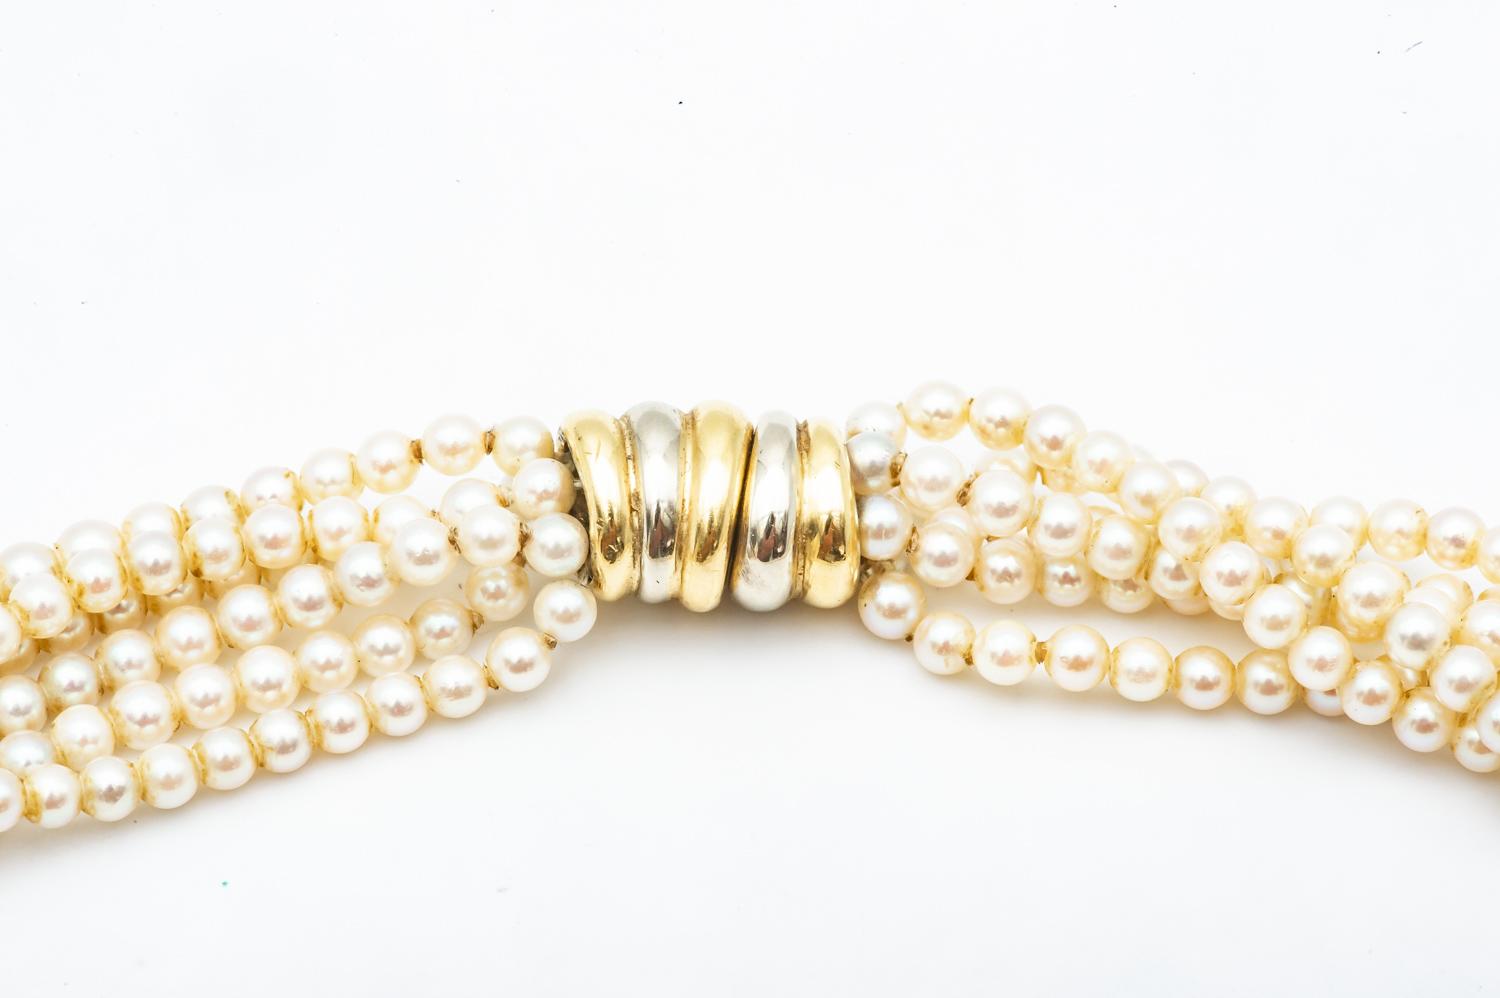 Art Deco 6 Row Cultured Pearls Necklace Yellow and White Gold 18 Karat For Sale